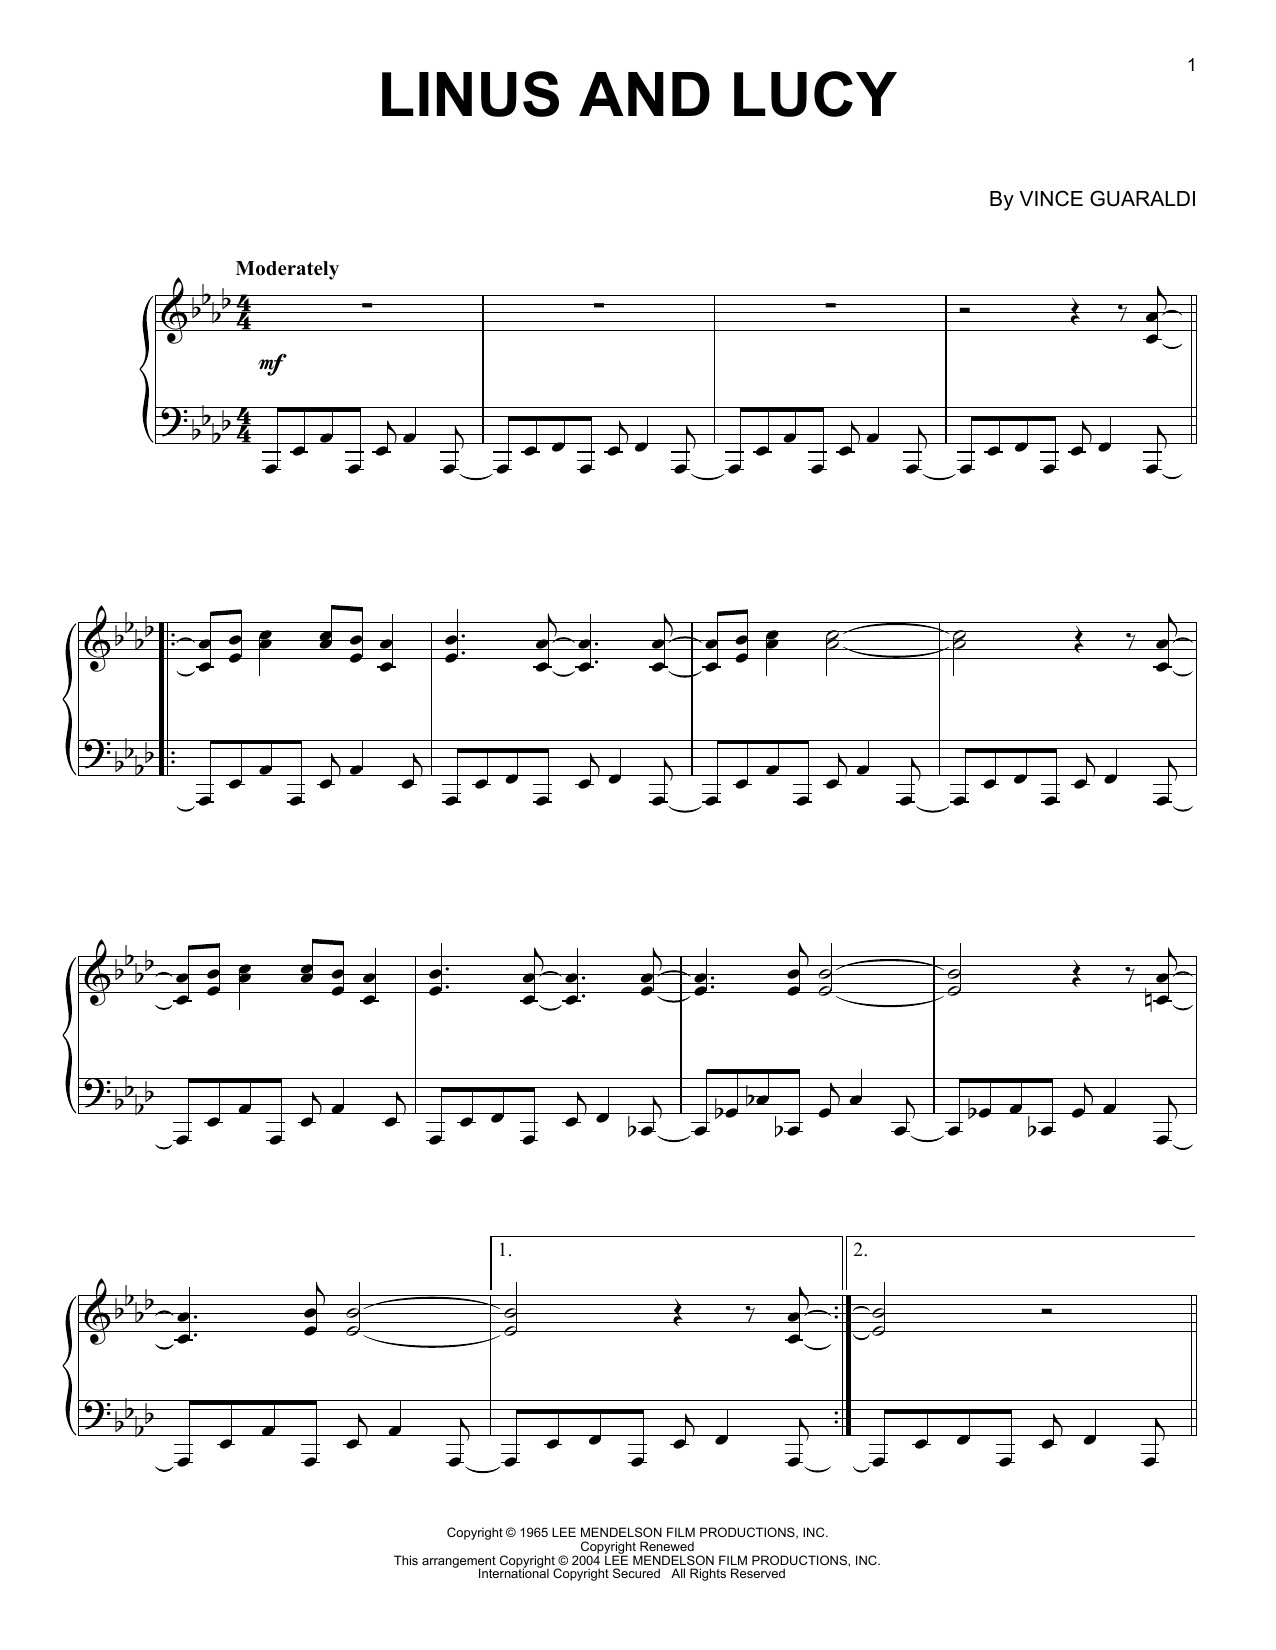 Download Vince Guaraldi Linus And Lucy Sheet Music